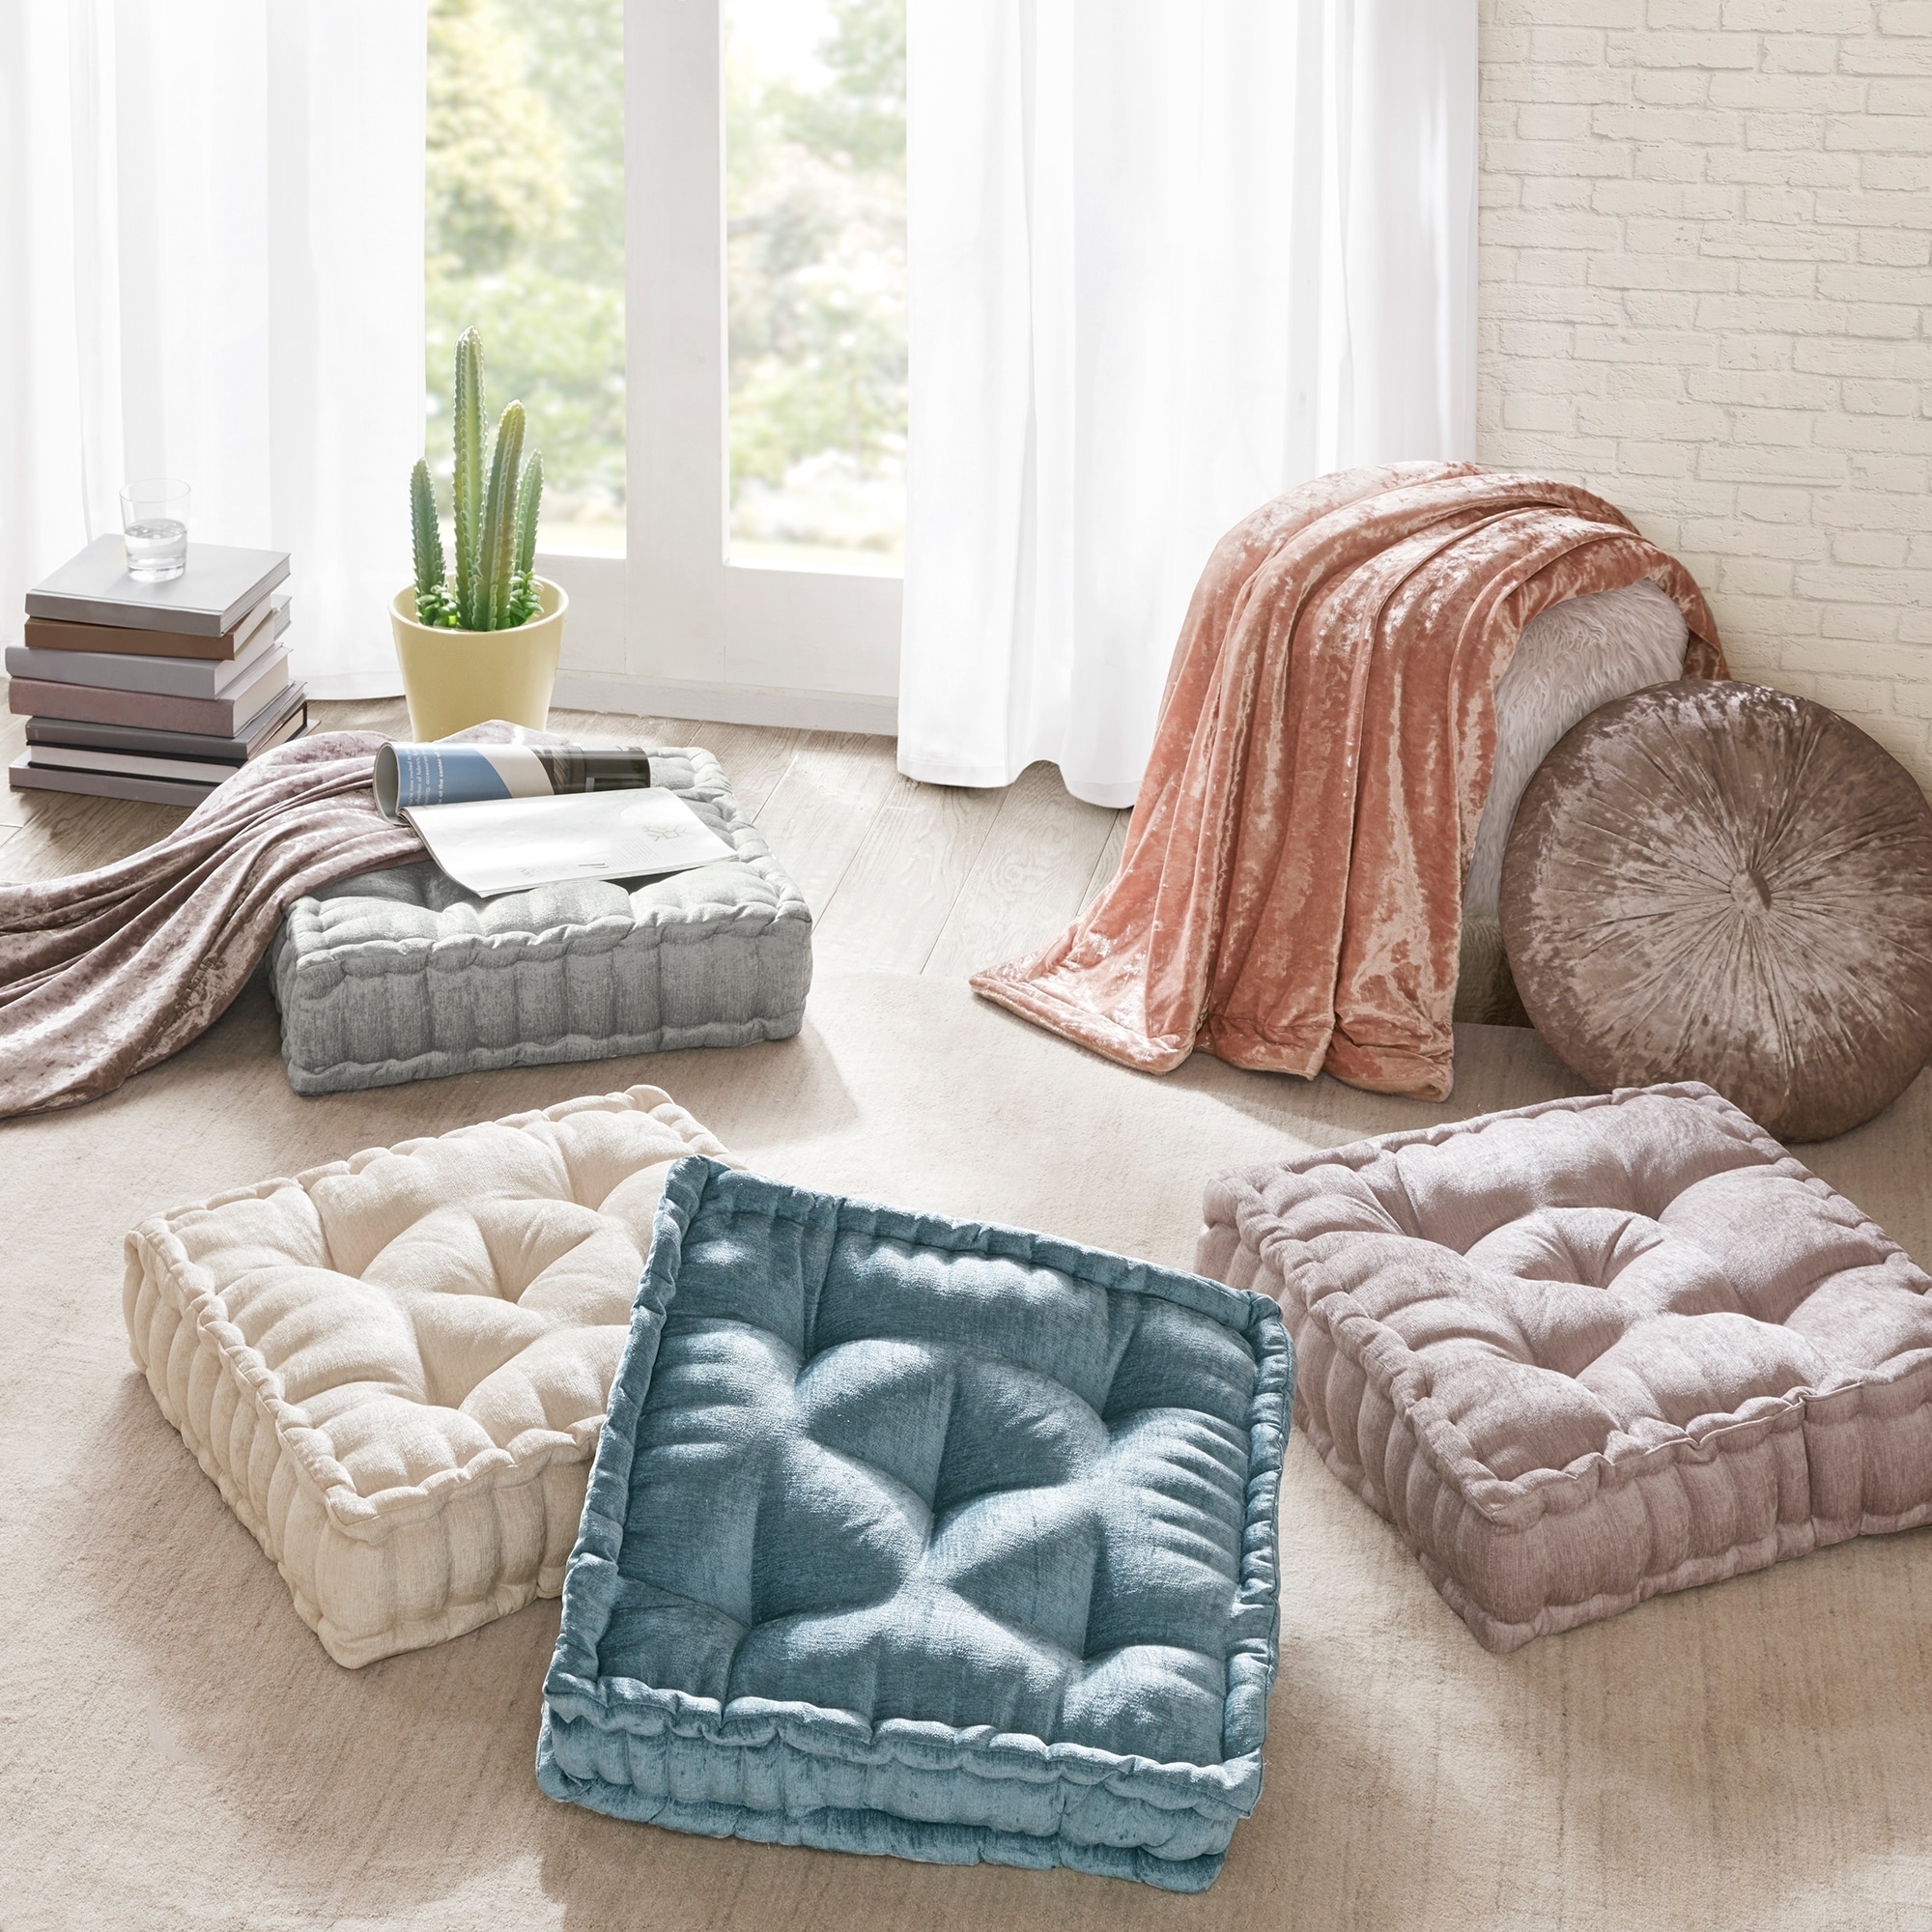 https://ak1.ostkcdn.com/images/products/21596131/Intelligent-Designs-Charvi-Poly-Chenille-Square-Floor-Pillow-Cushion-a21280a1-b044-4cfd-8542-2bad747a063a.jpg